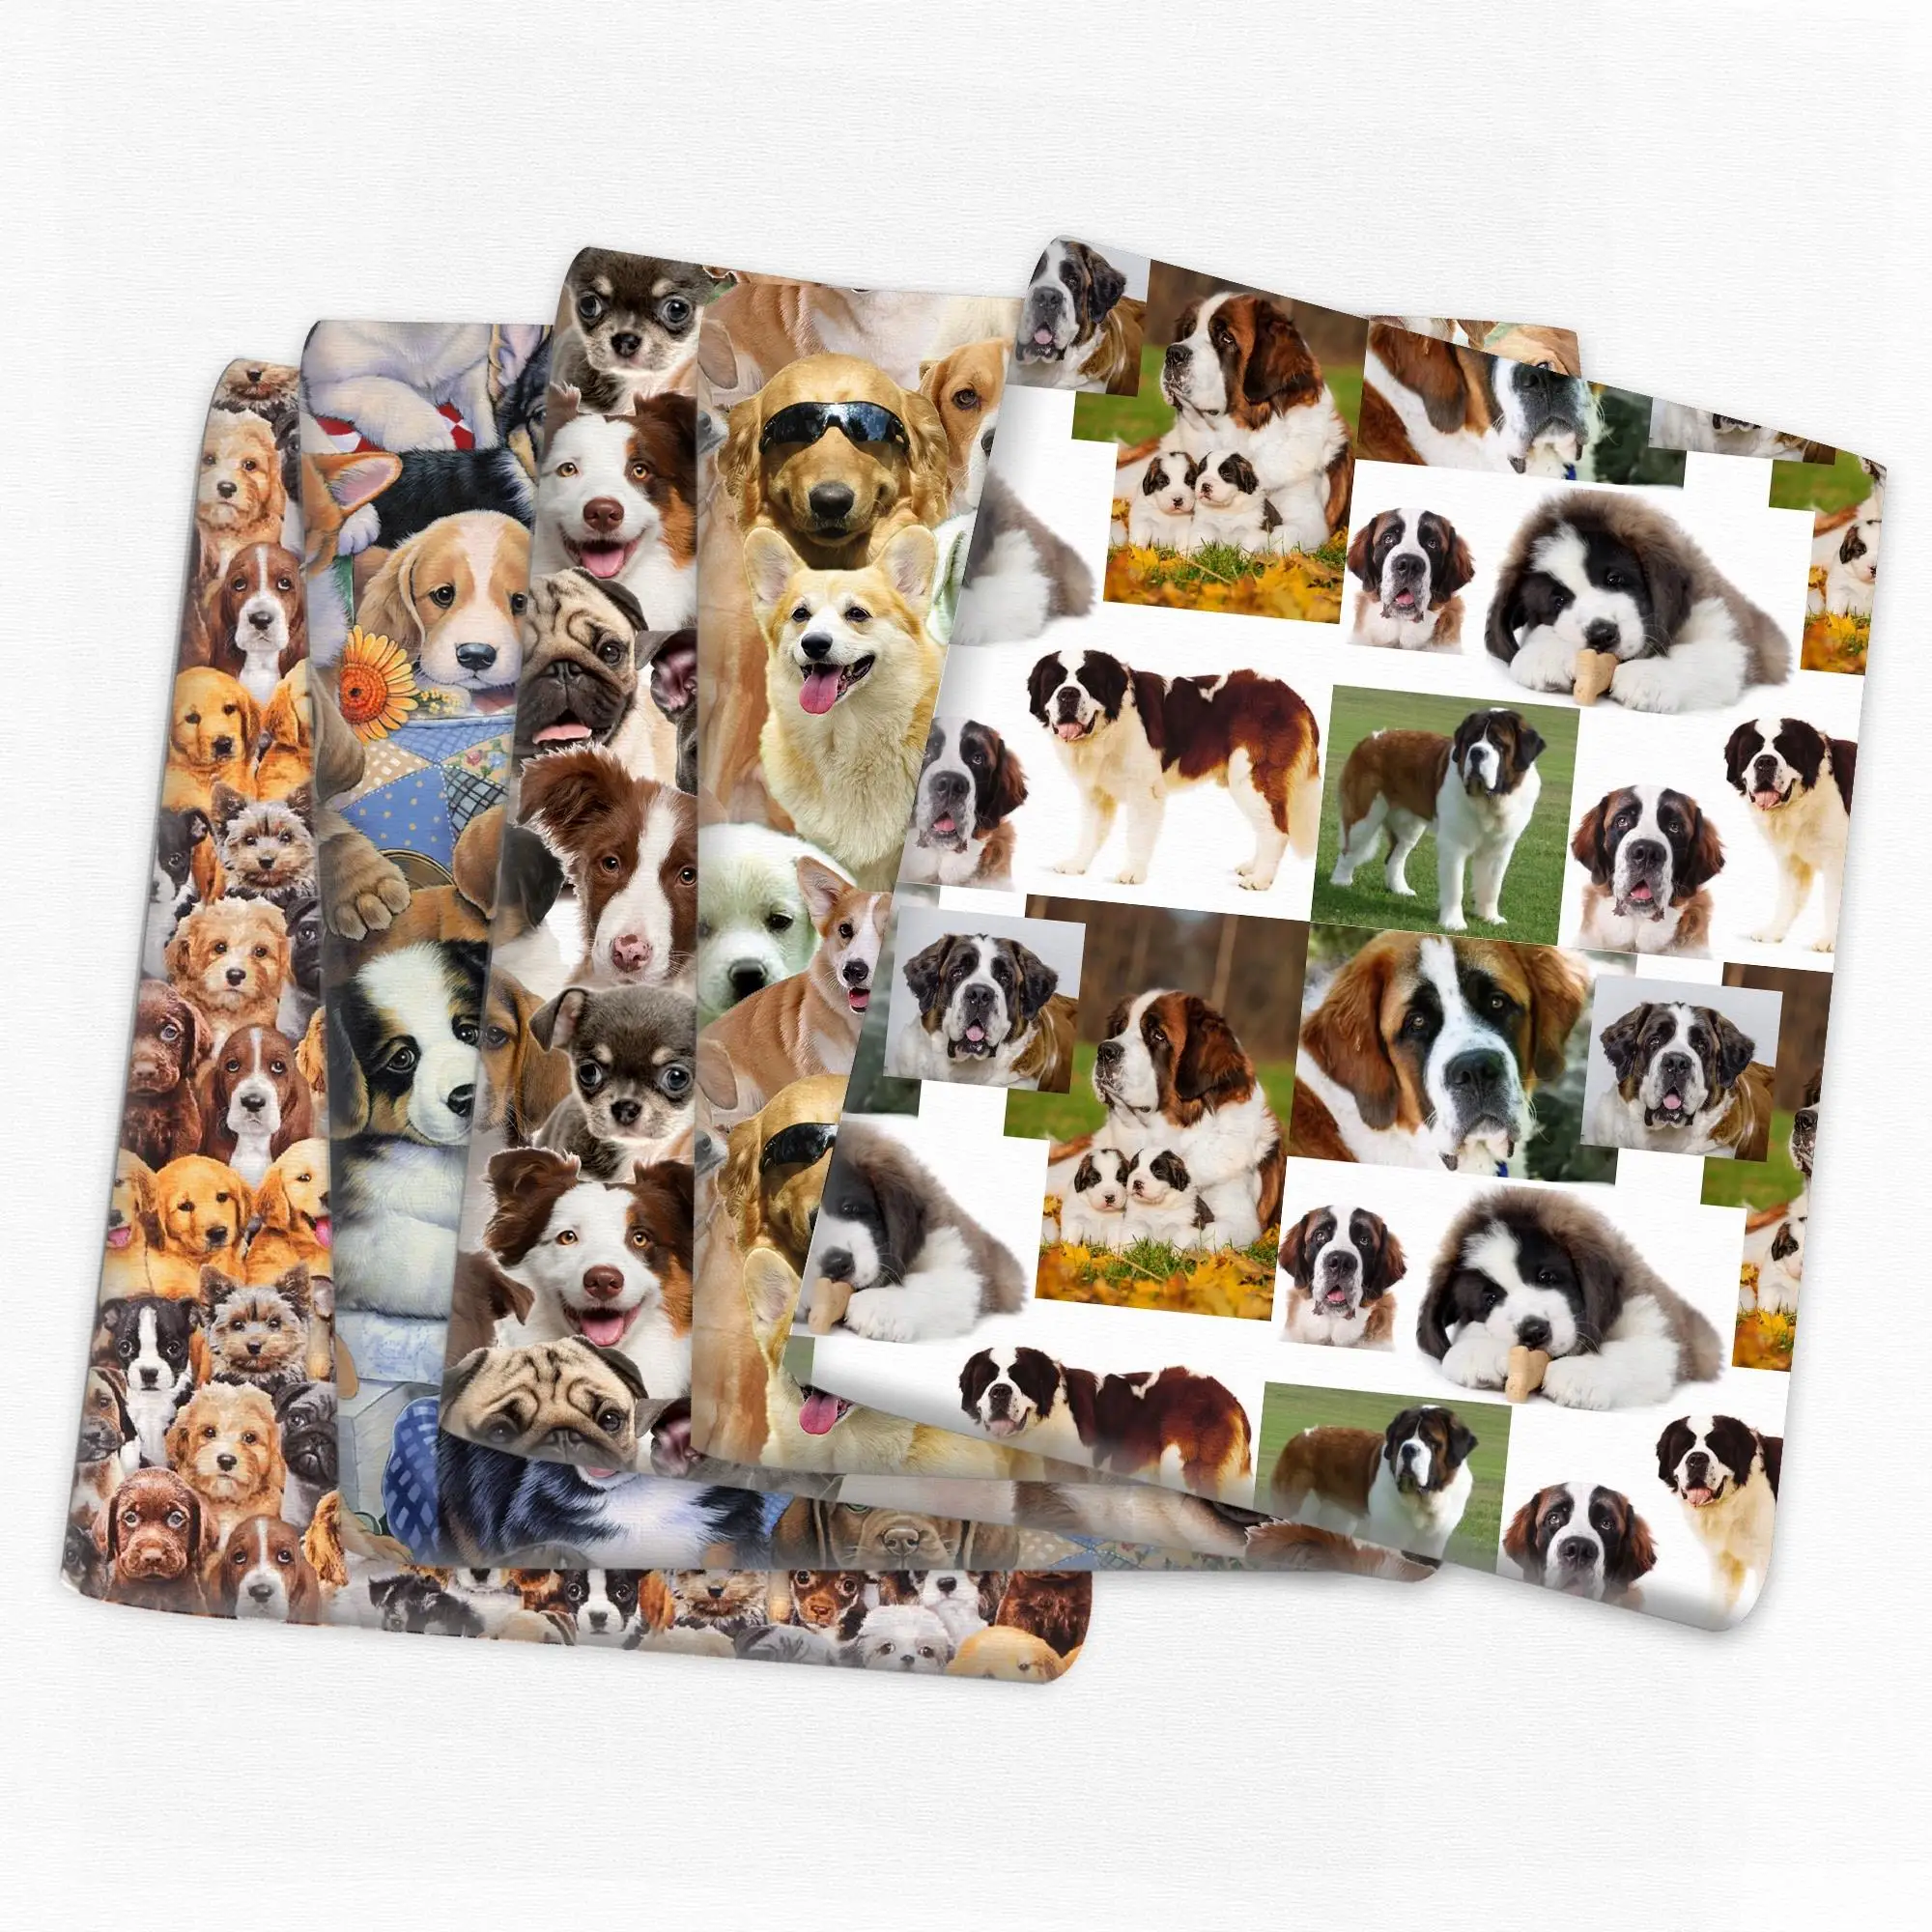 

60pc/lot Cartoon Dog Printing Puppy Cat Dog Bandanas Scarf Tie Handkercheif Pet Accessories Grooming Products CH21